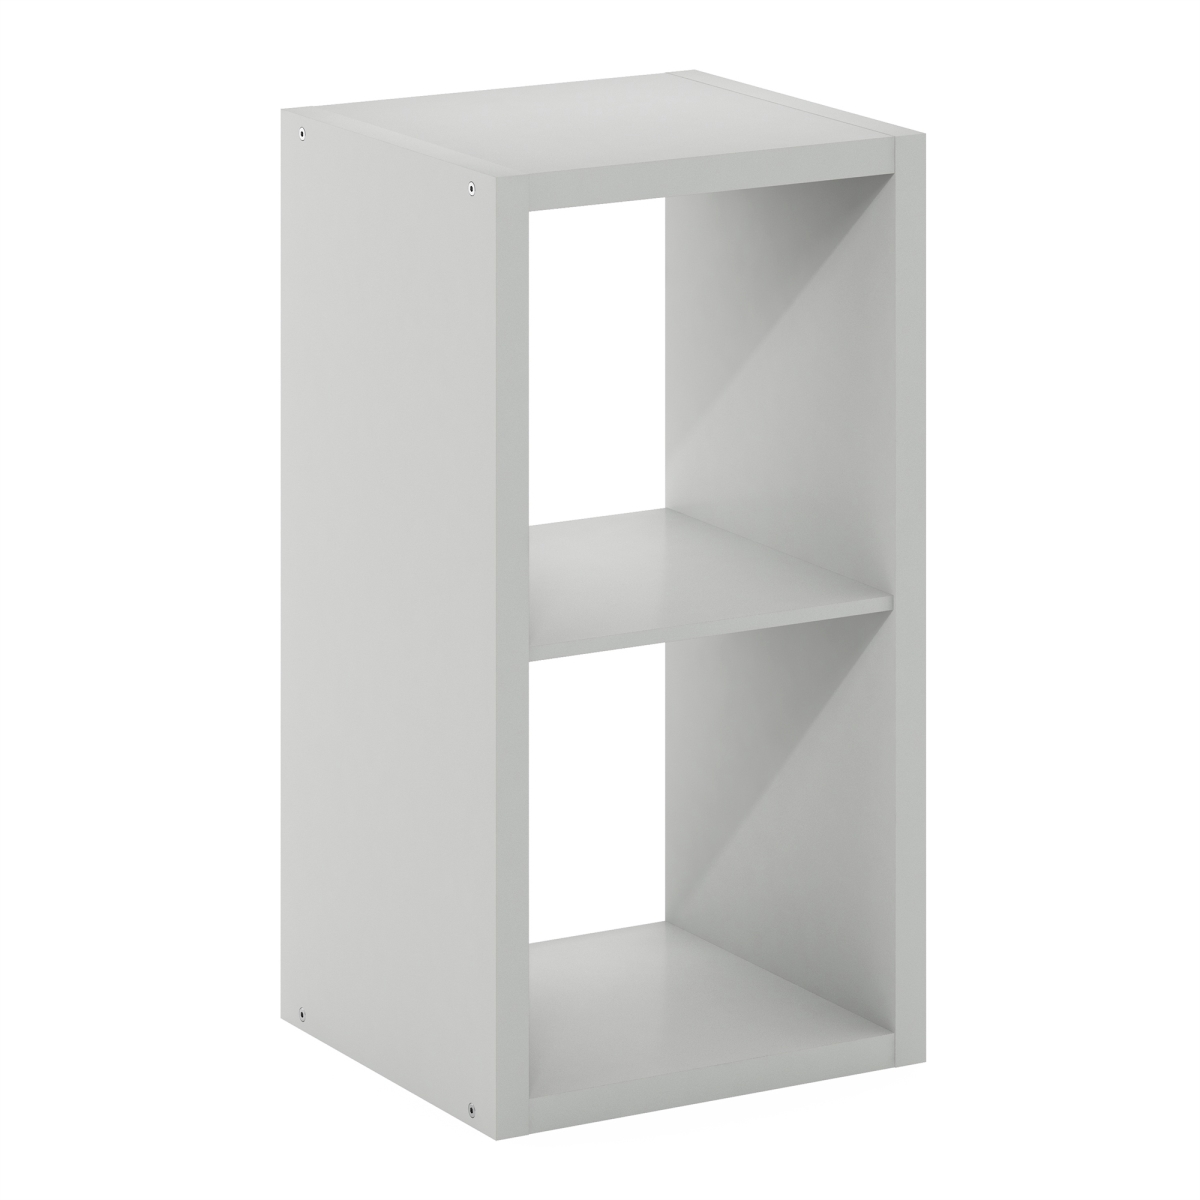 Picture of Furinno LU22003LG Cubicle Open Back Decorative Cube Storage Organizer - 2-Cube, Light Grey